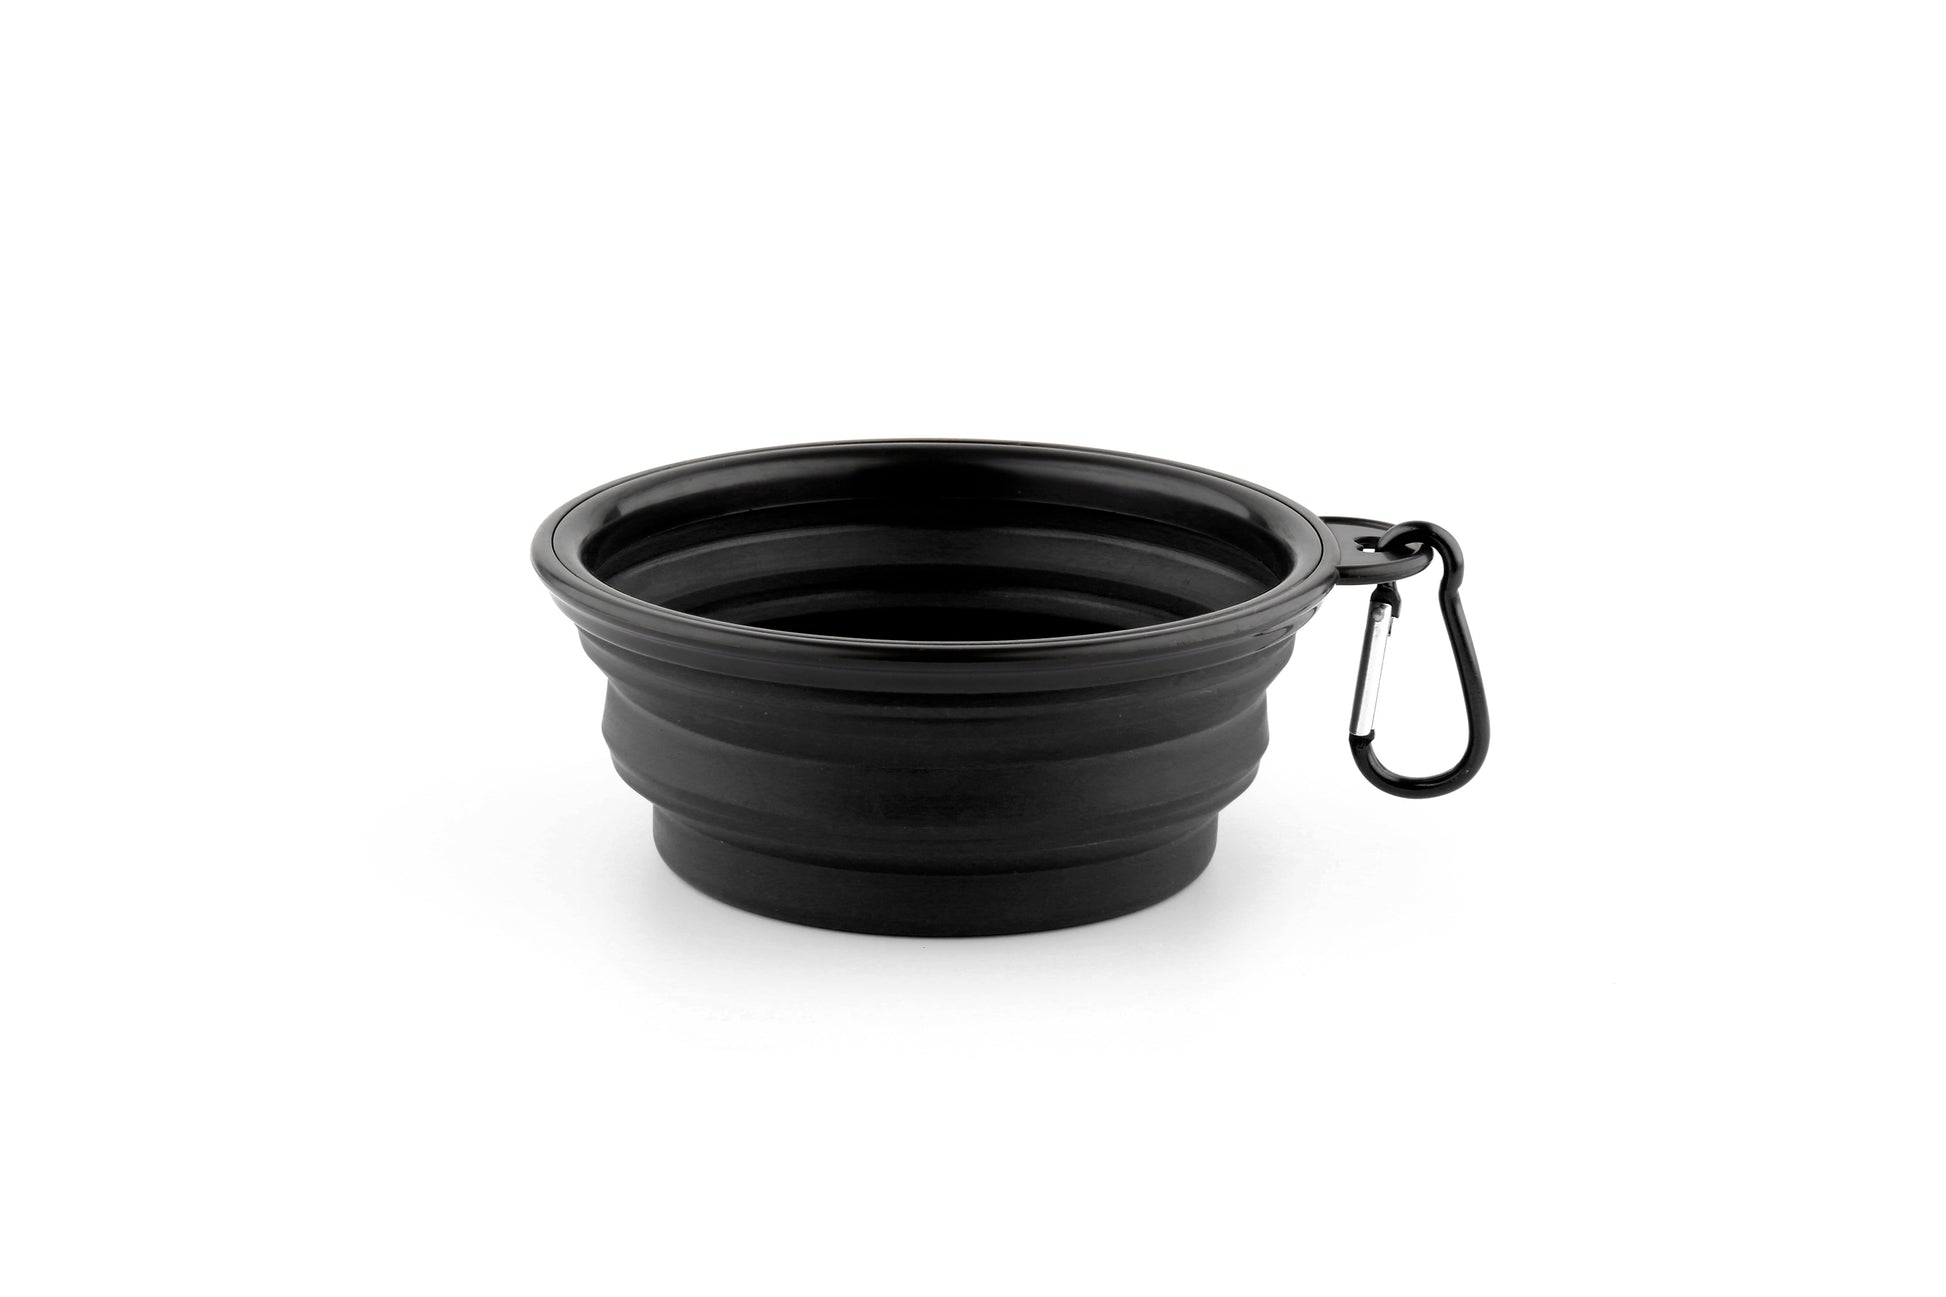 Bowl fully expanded, comes with a click for easy attaching to a lead or rucksack